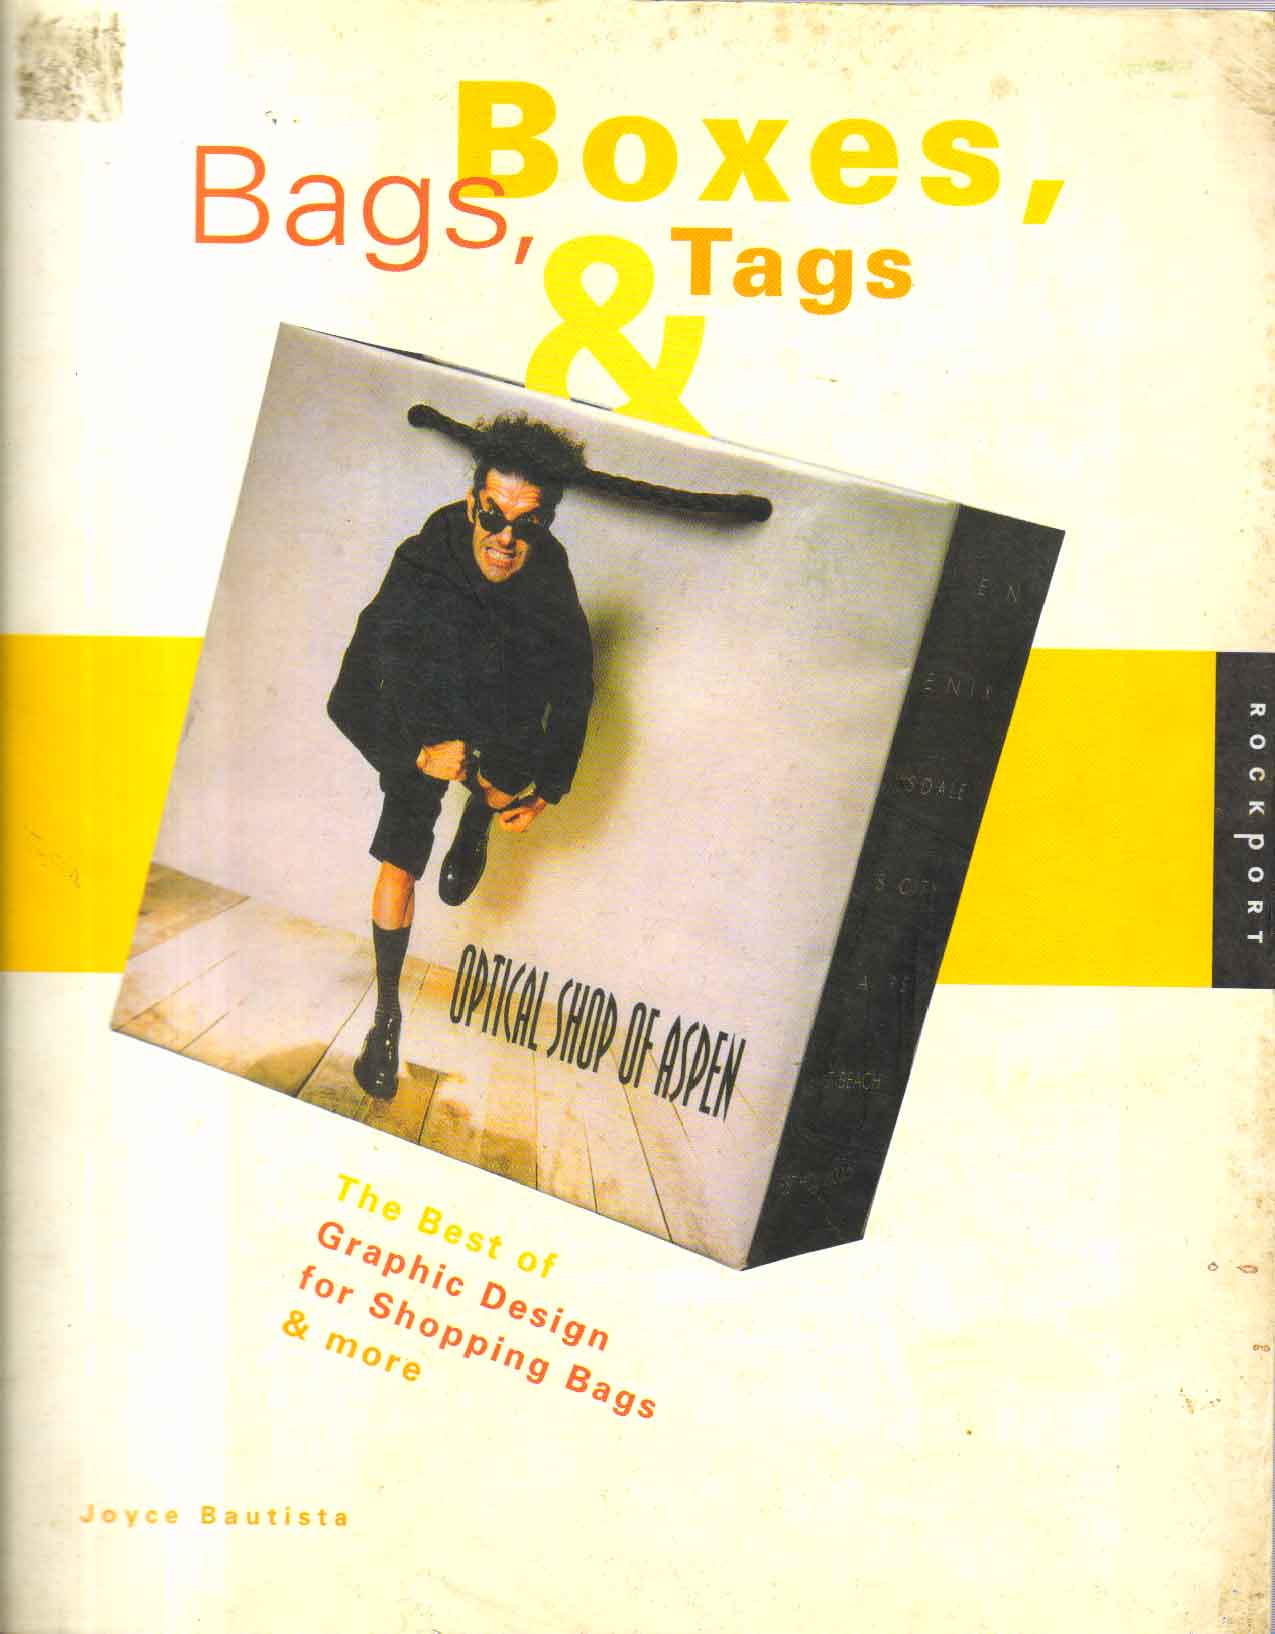 Bags, Boxes and Tags